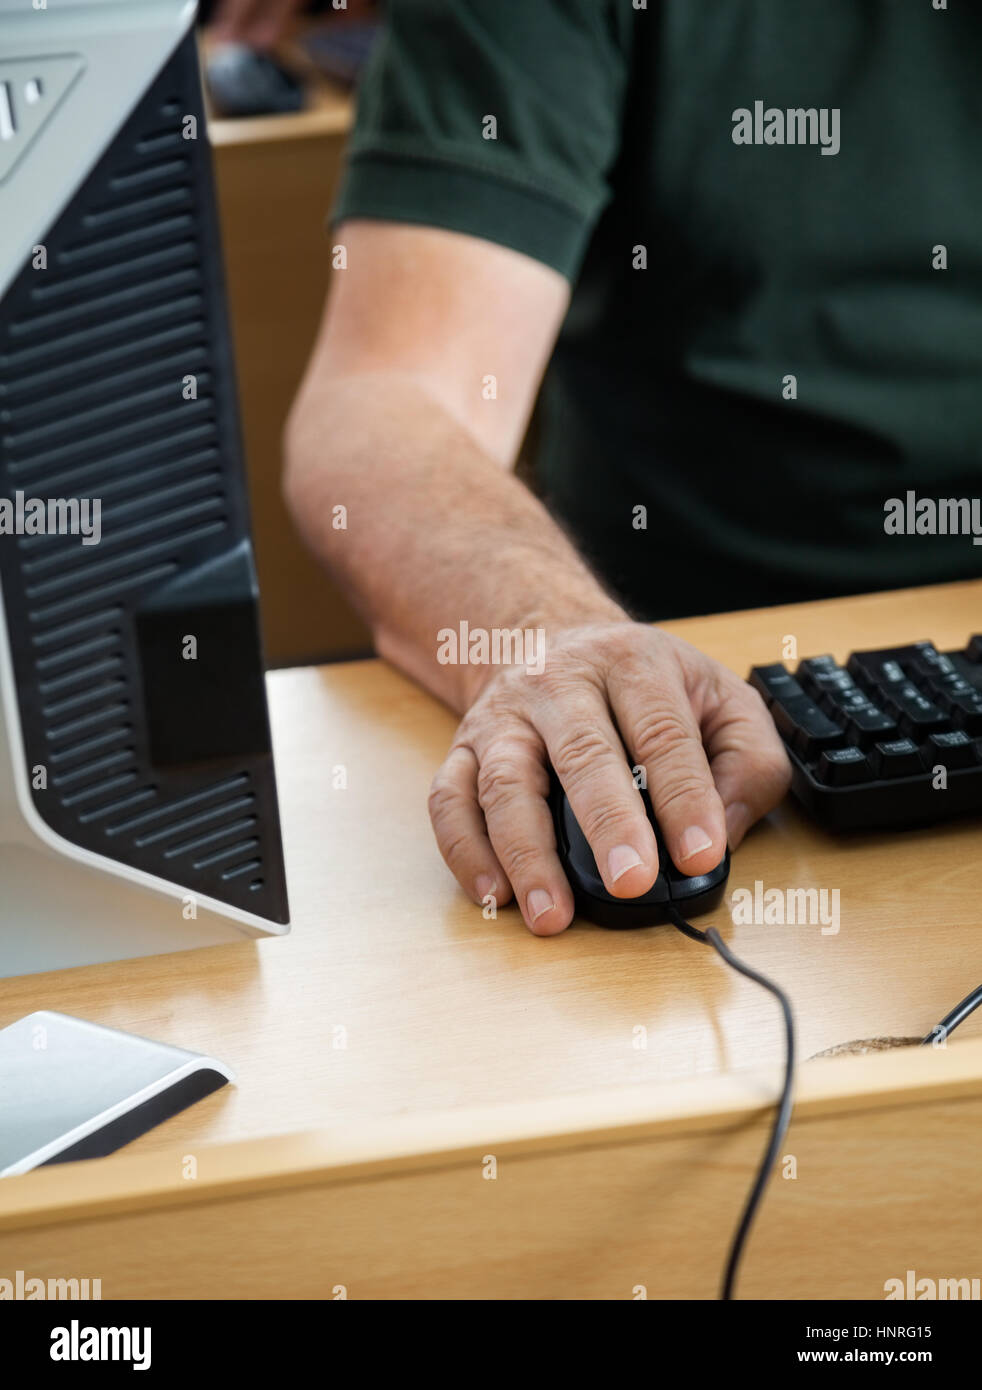 Midsection Of Senior Student Using Desktop PC Stock Photo